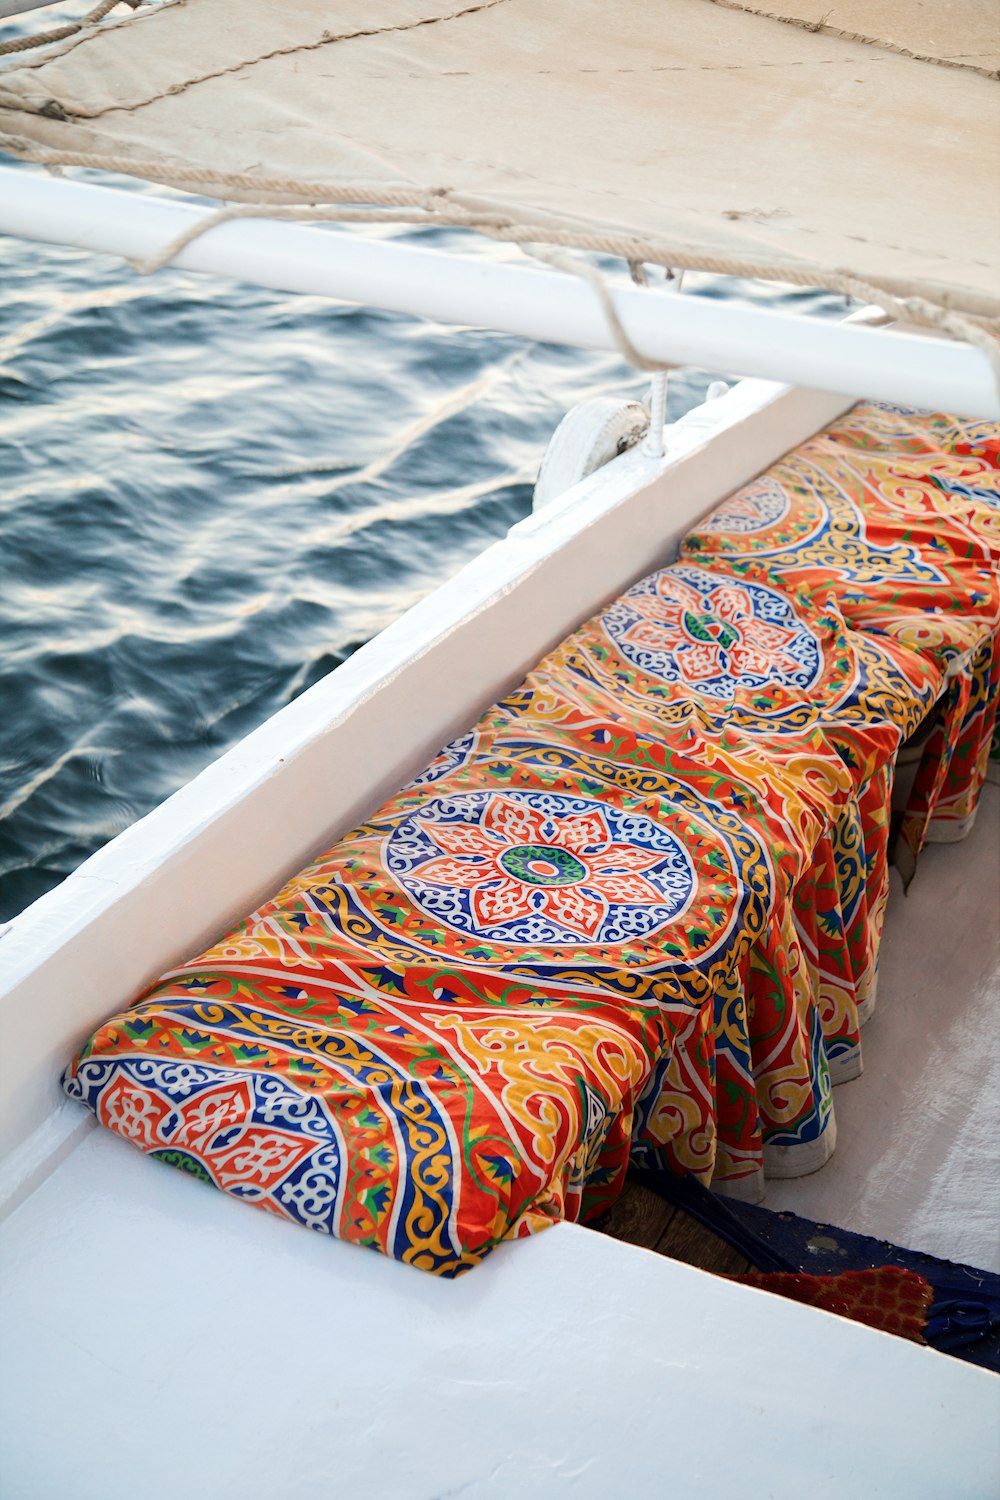 a colorful bench on a boat in the water